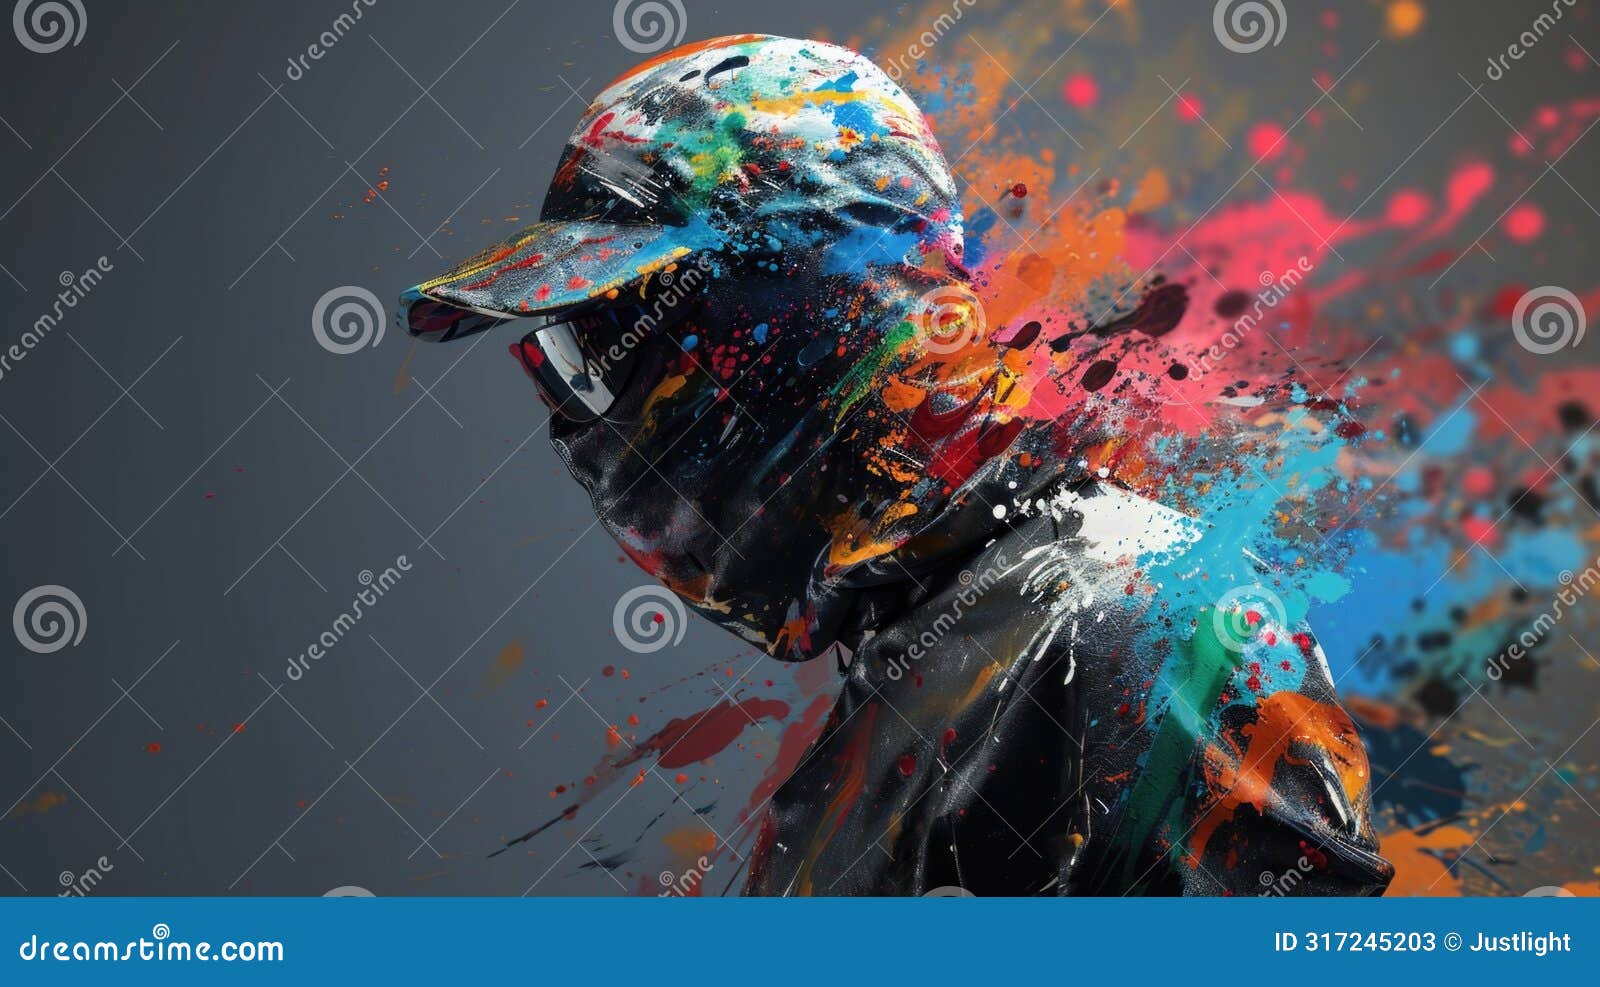 cartoon digital avatars of calligrapher an artistic avatar with a paintsplattered smock, using a combination of